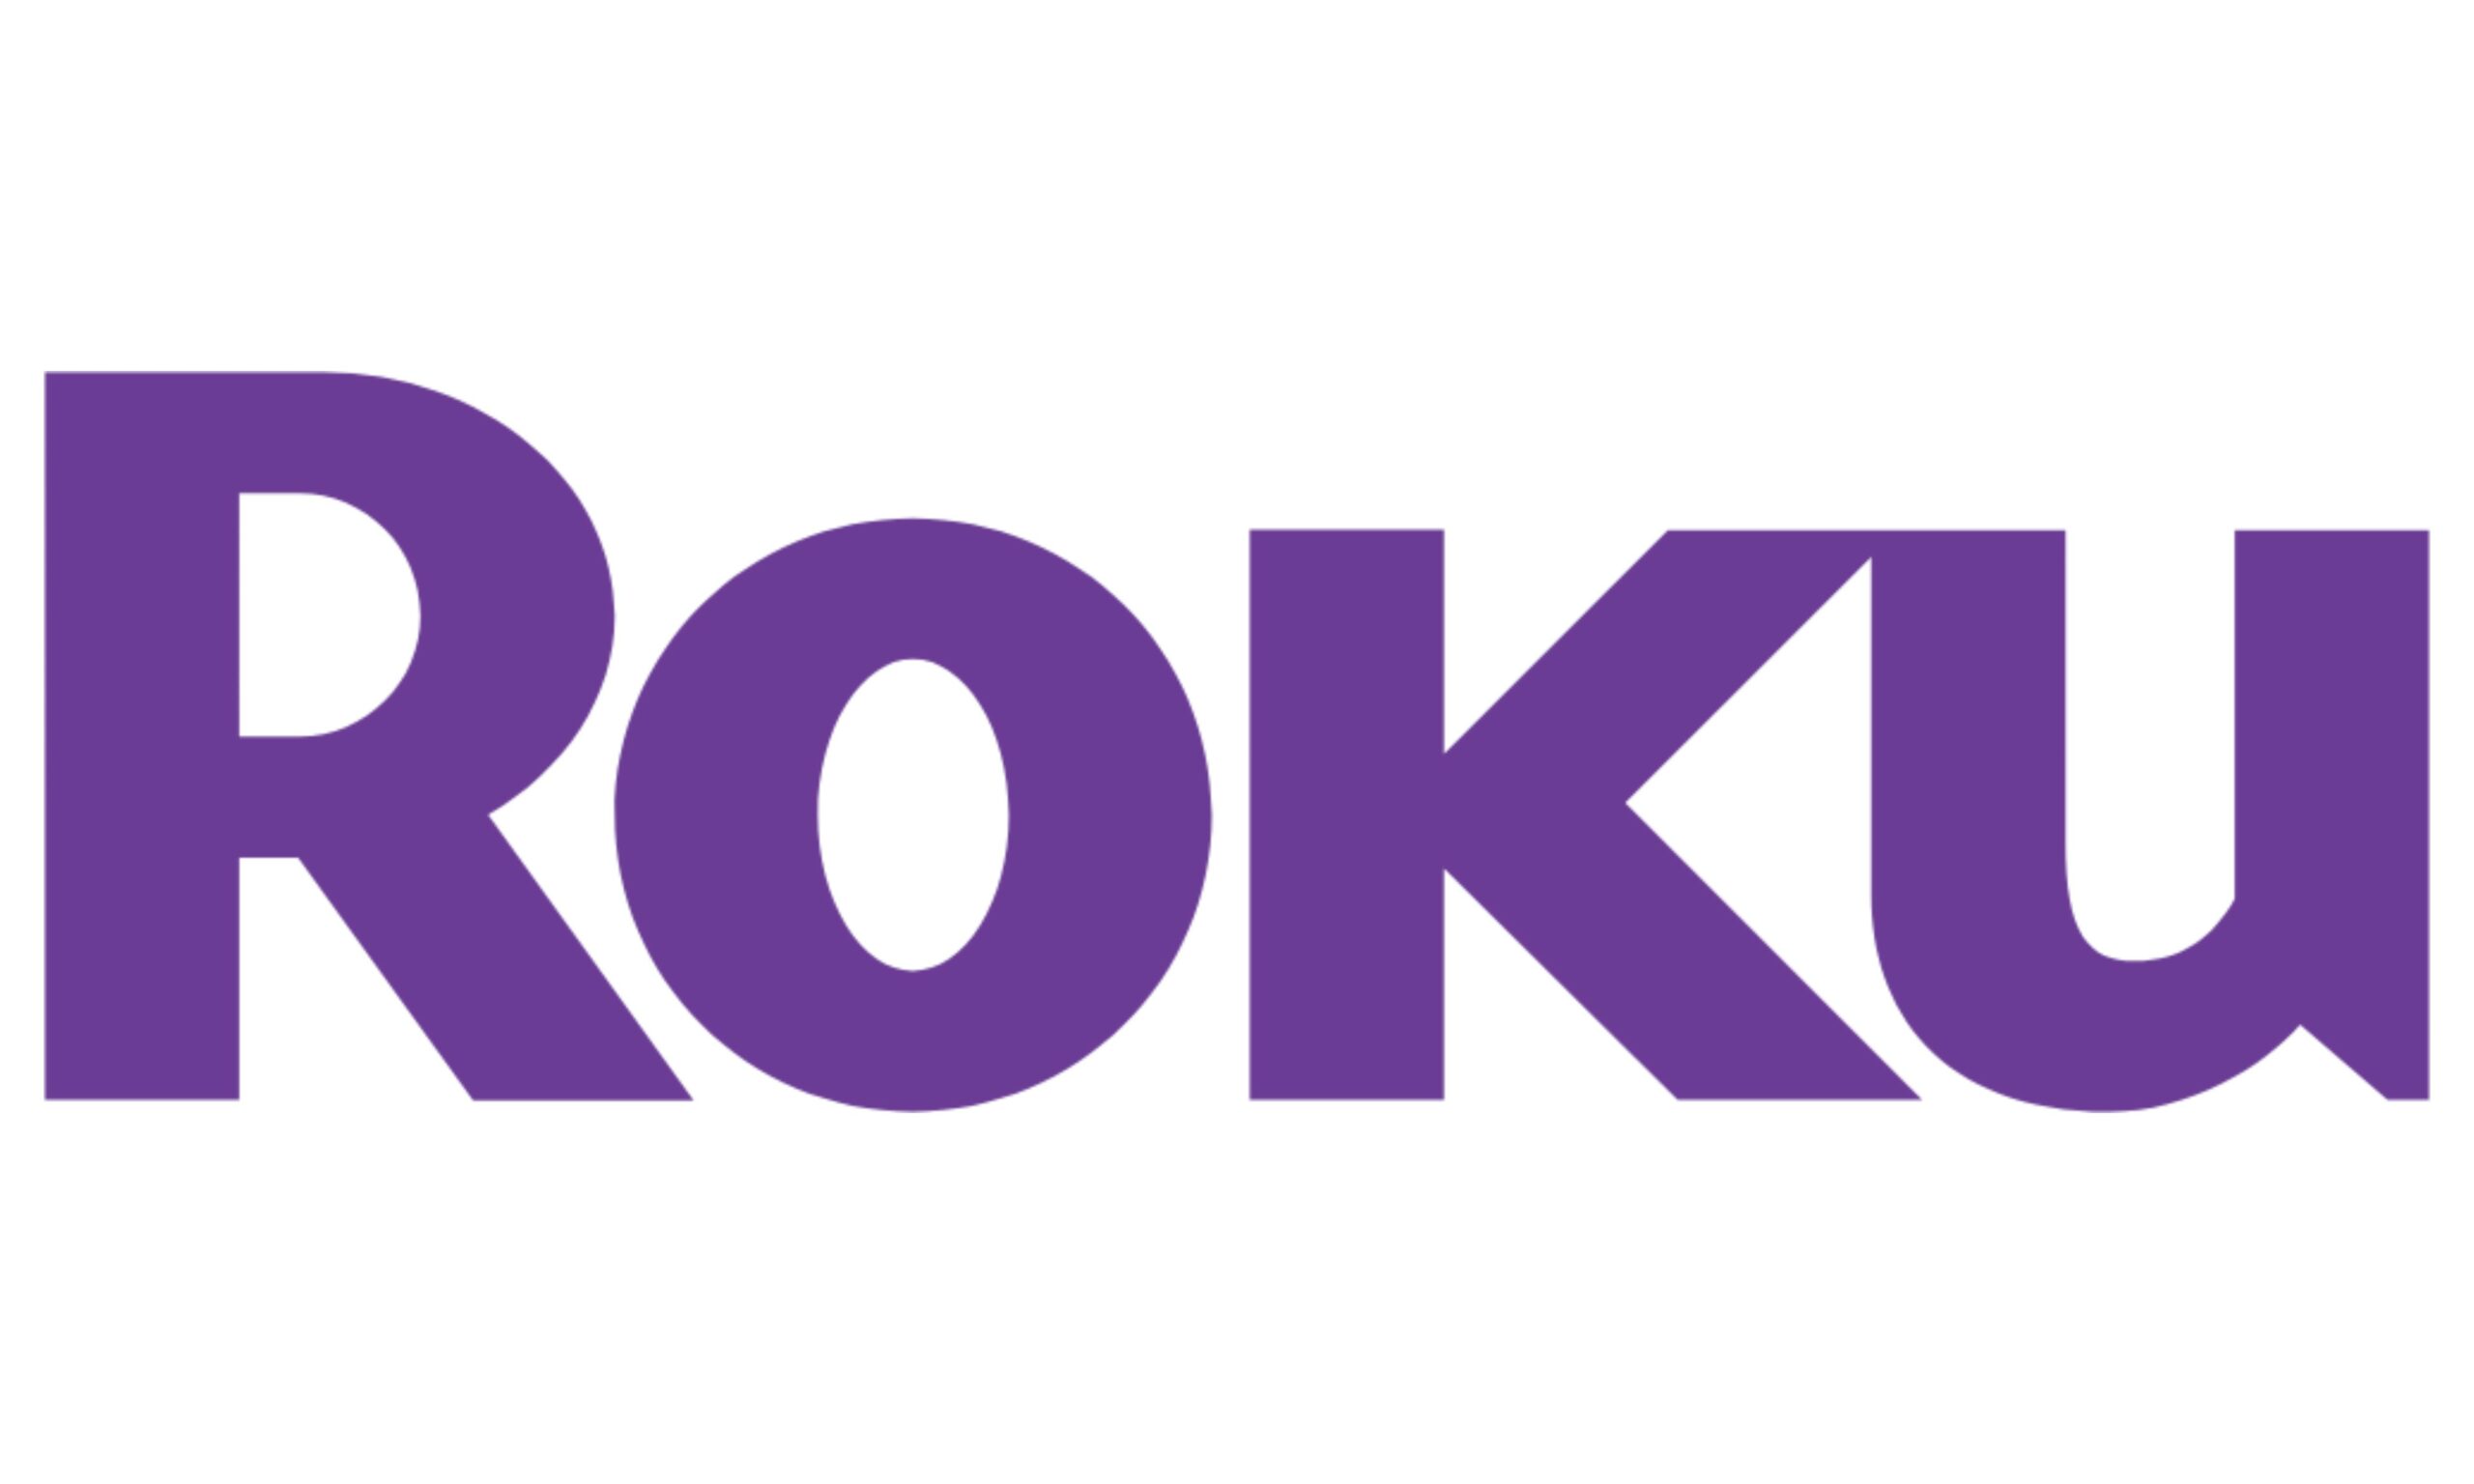 q3 results roku monetized video ad impressions more than doubled again year over year scaled